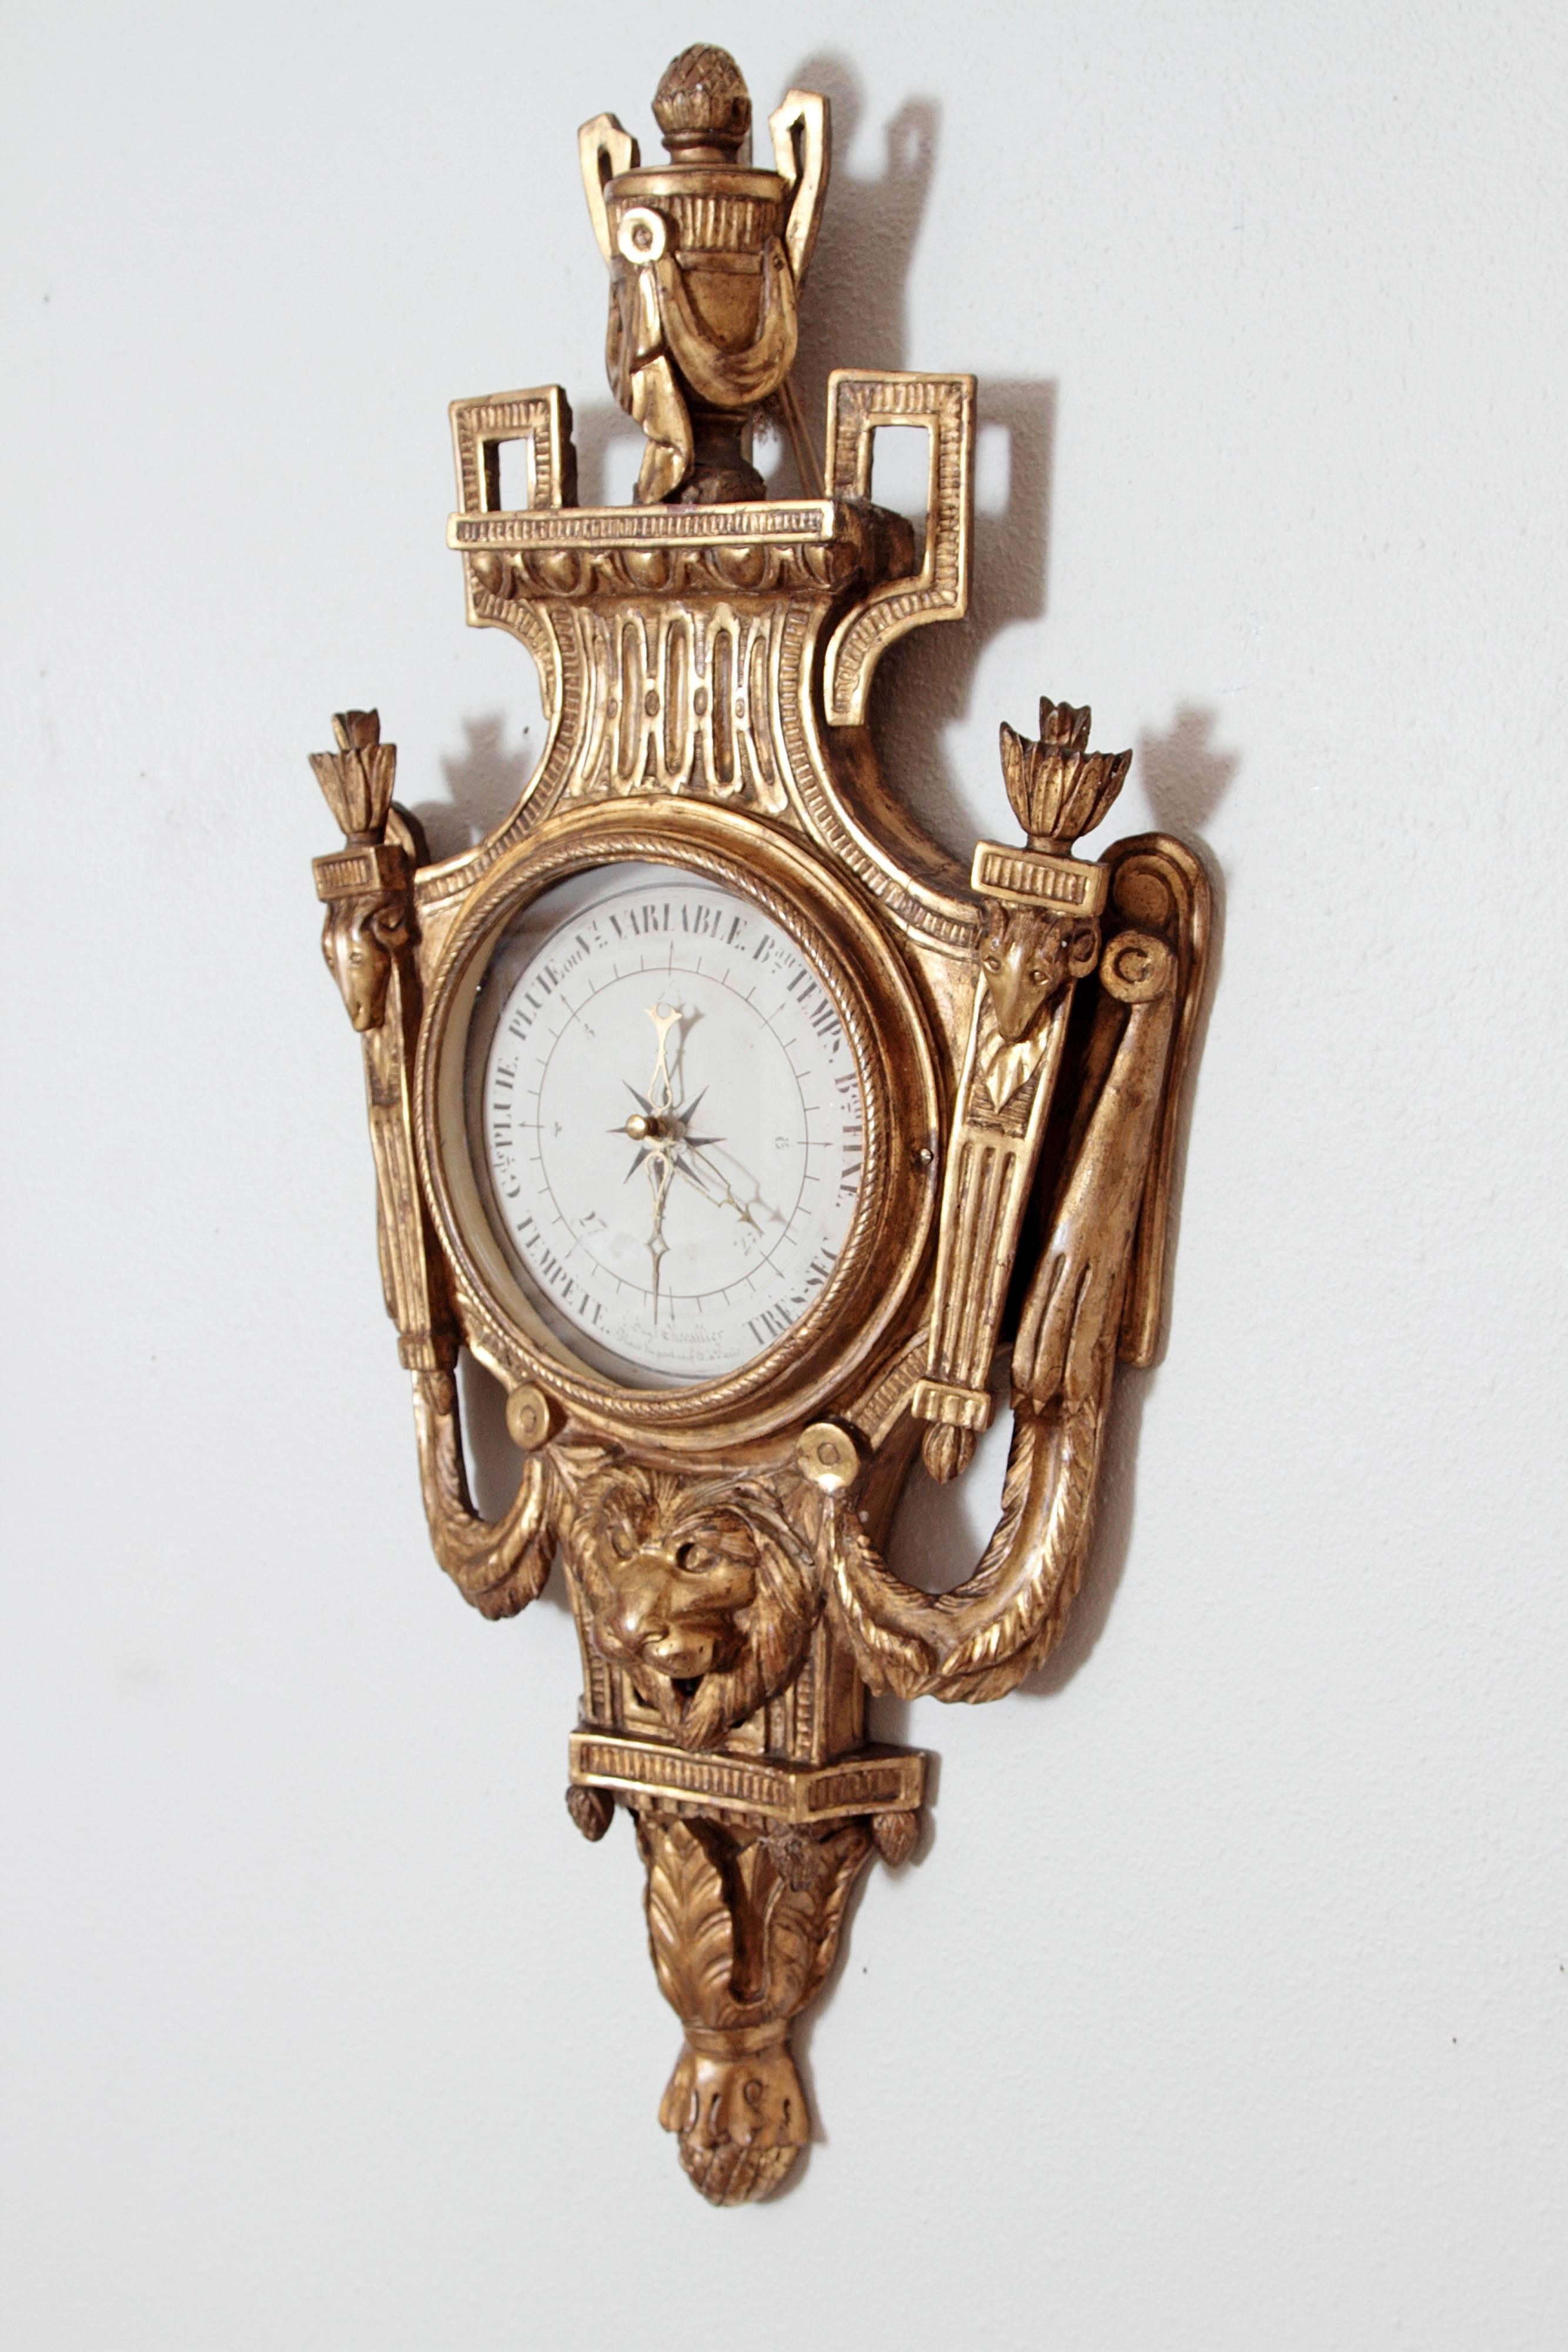 A Louis XVI period carved and giltwood cartel form barometer
Signed “L’Ingénieur Chevallier*, Place du Pont Neuf 15 Paris” on a hand-drawn paper dial in black ink.
France, circa 1780

The Engineer-Optician House of Chevallier (with two LLs) was